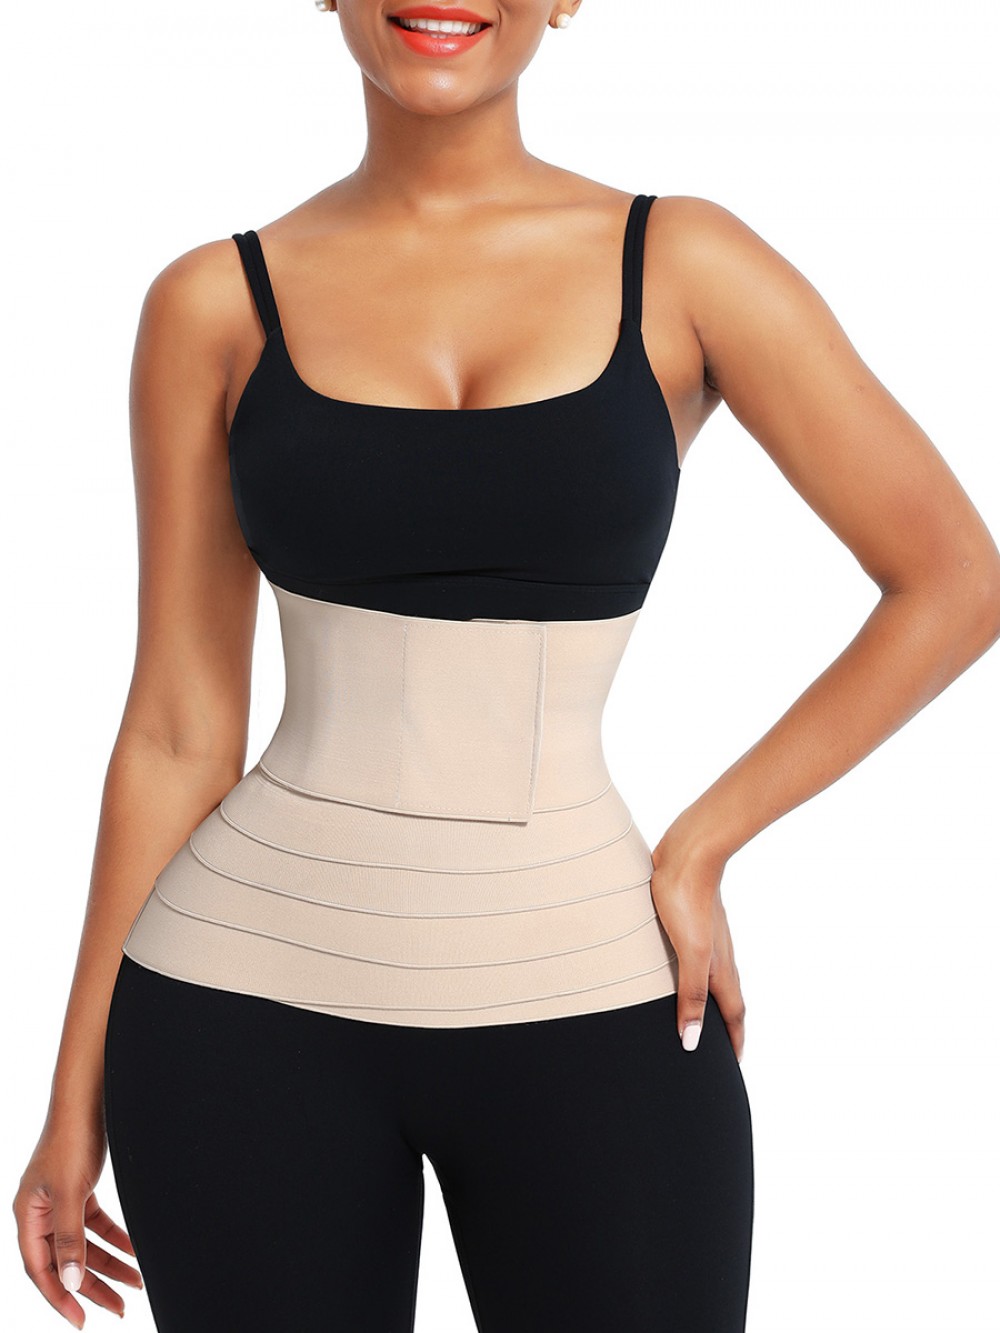 Nude Elasticity Knit Bandage Waist Wrap Waist Trainer For Lose Weight Belly Tummy Trimmer